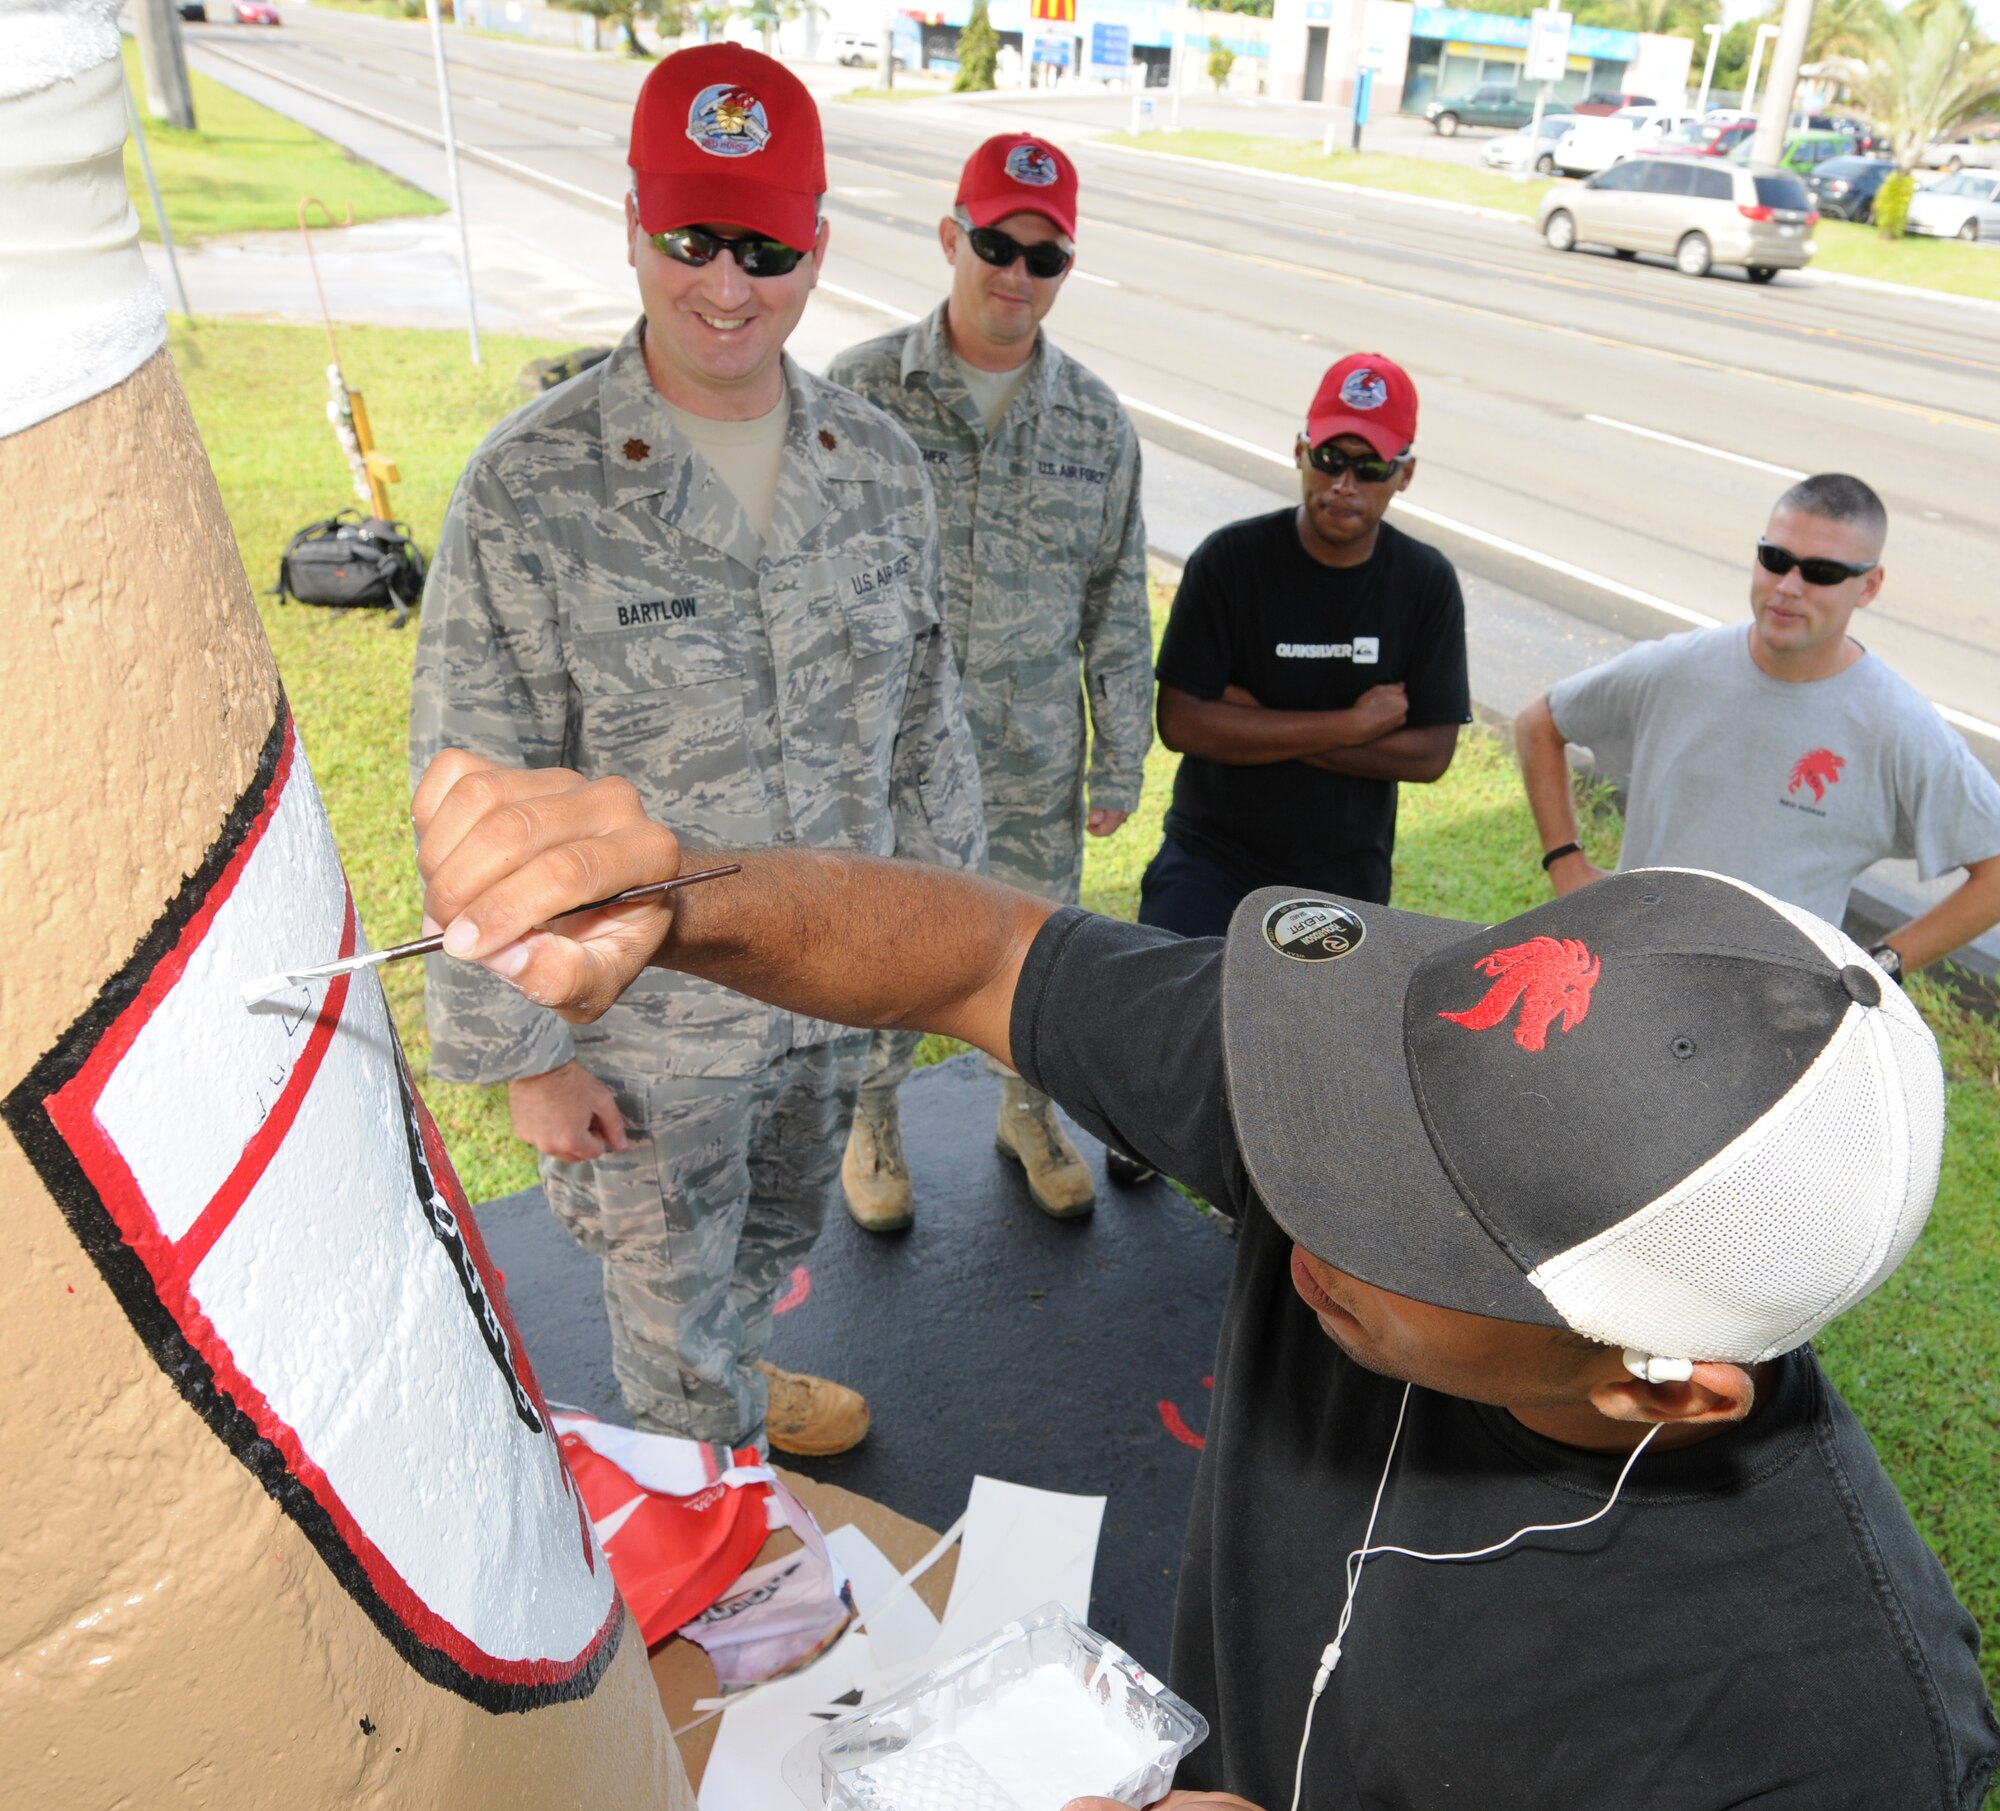 ANDERSEN AIR FORCE BASE, Guam - Co-workers watch as Staff Sgt. Cameron
Pleasant, 554th RED HORSE Squadron structures shop, creates a work of art
using the squadron's emblem, April 7. Sergeant Pleasant dedicated more than
five hours to paint his piece of the bus stop the RED HORSE squadron has
adopted within the local community. (U.S. Air Force photo / Senior Airman
Carlin Leslie)
